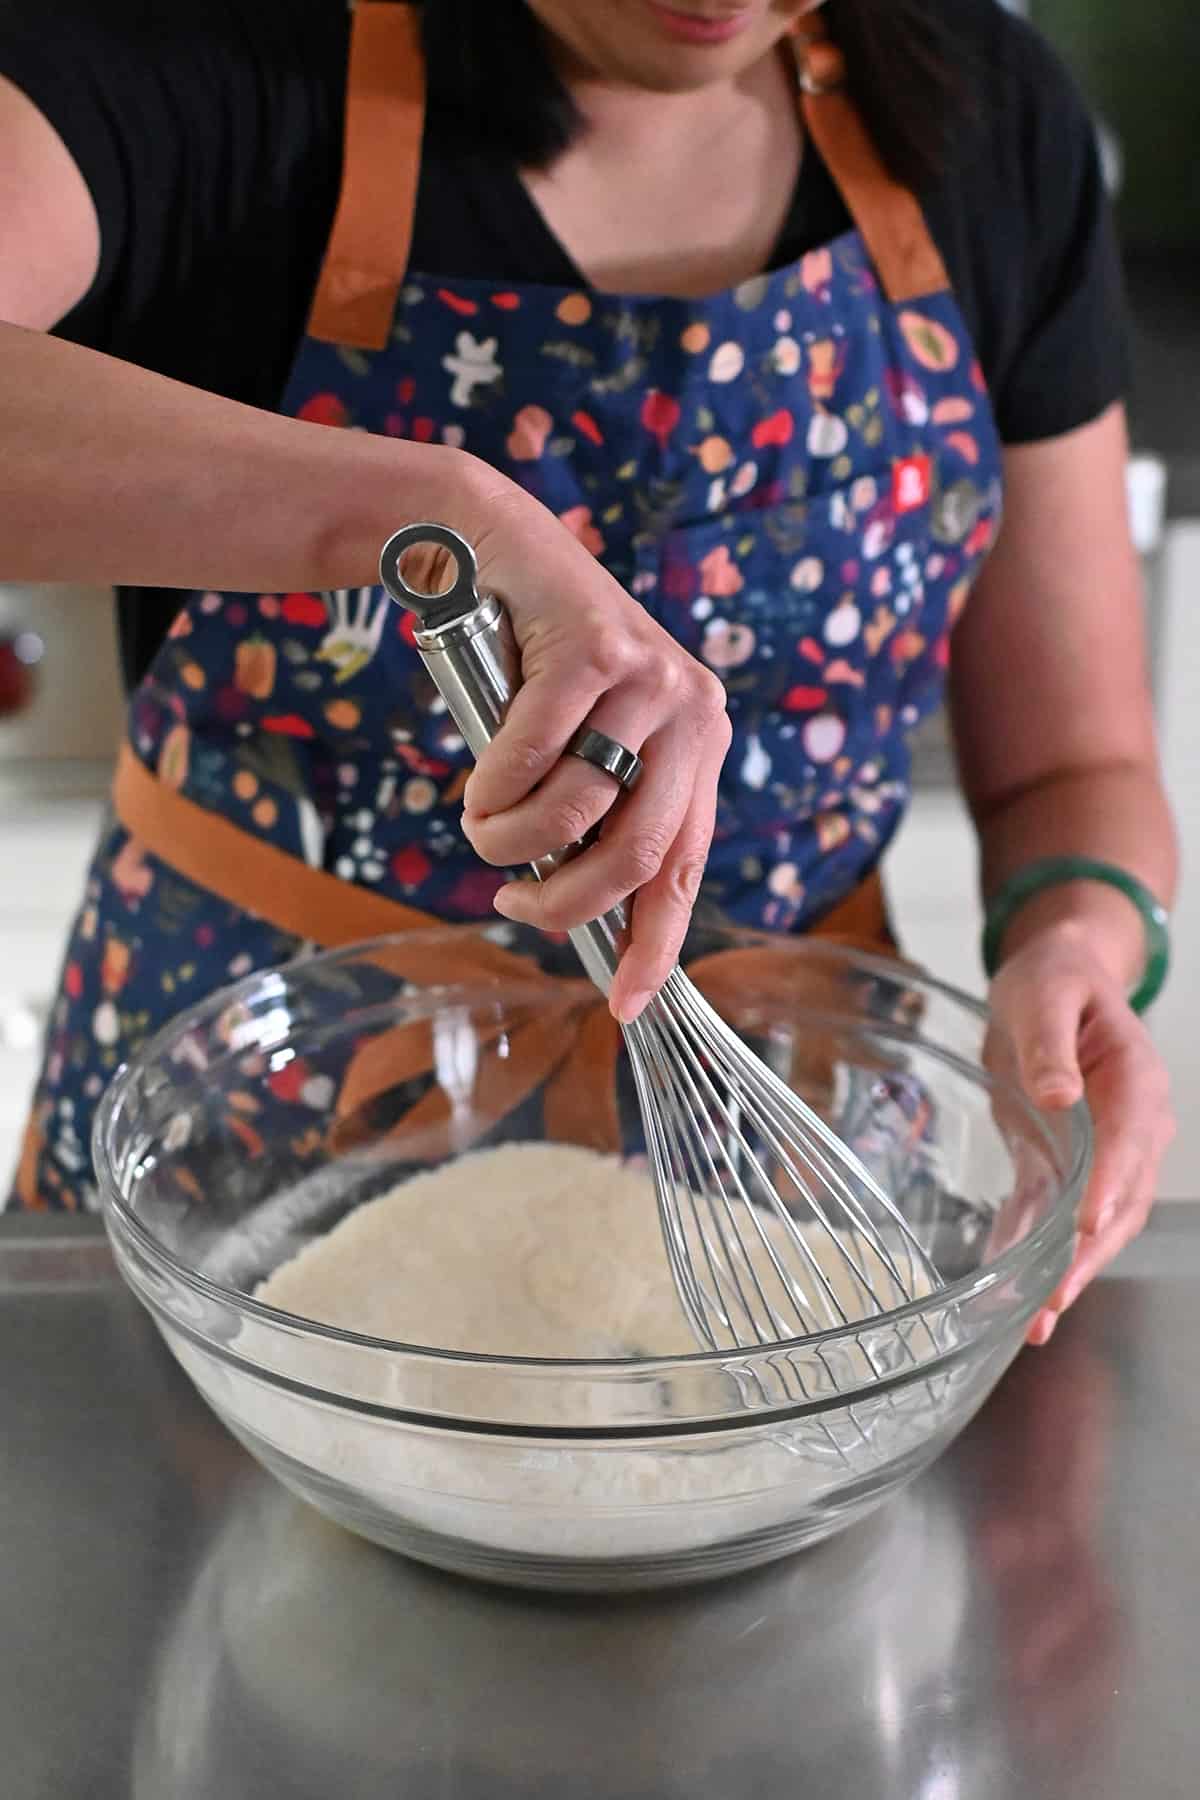 Whisking the dry ingredients for paleo and gluten free snickerdoodles in a large glass mixing bowl.